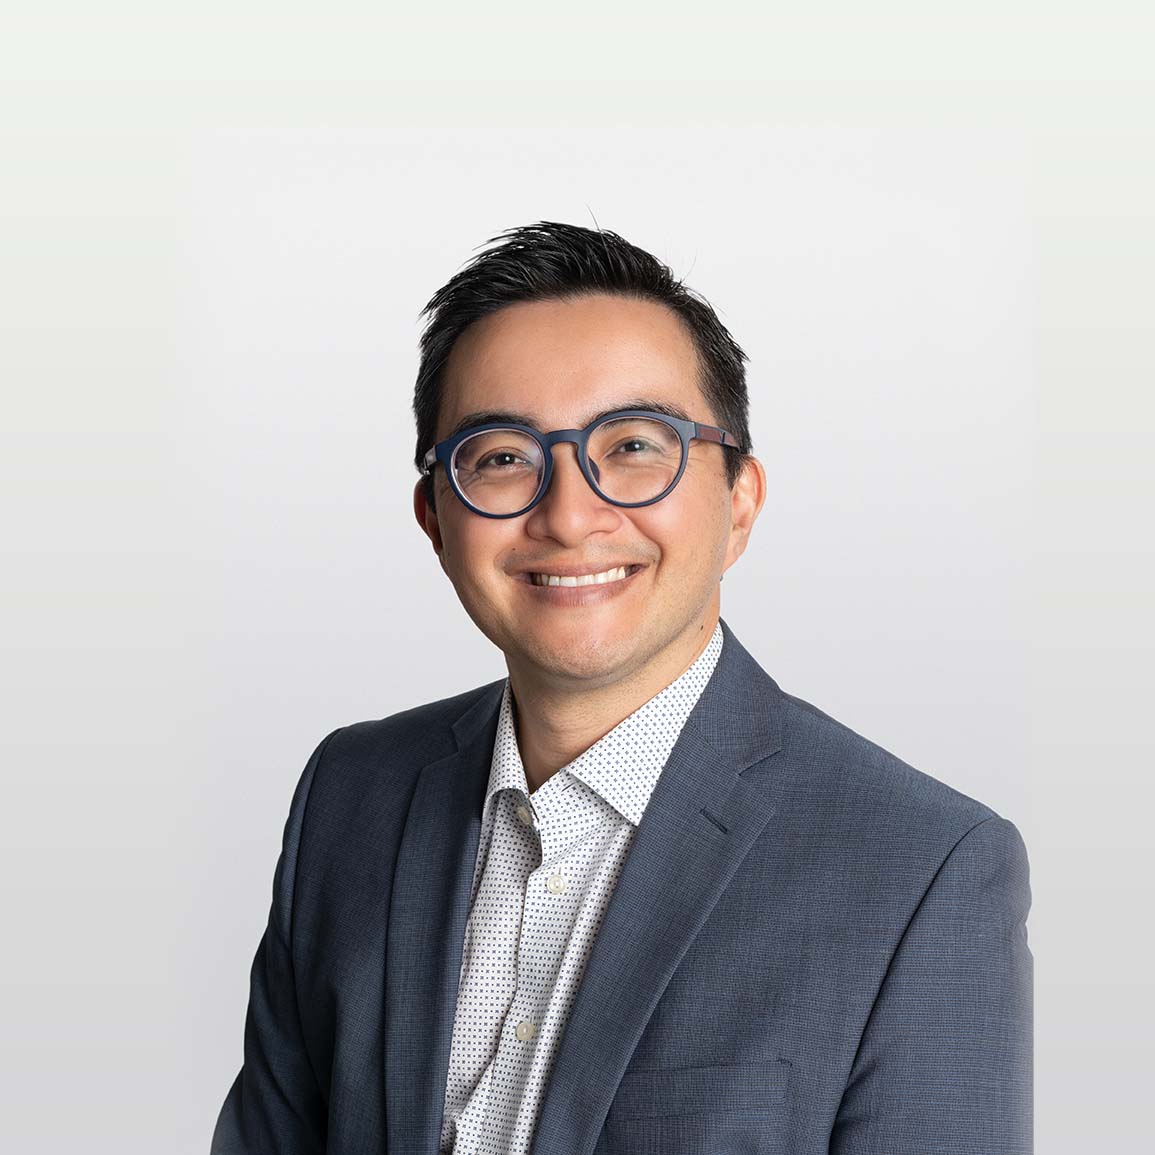 Image of Desmond Chow, Senior Financial Advisor with ATB Wealth, against white background